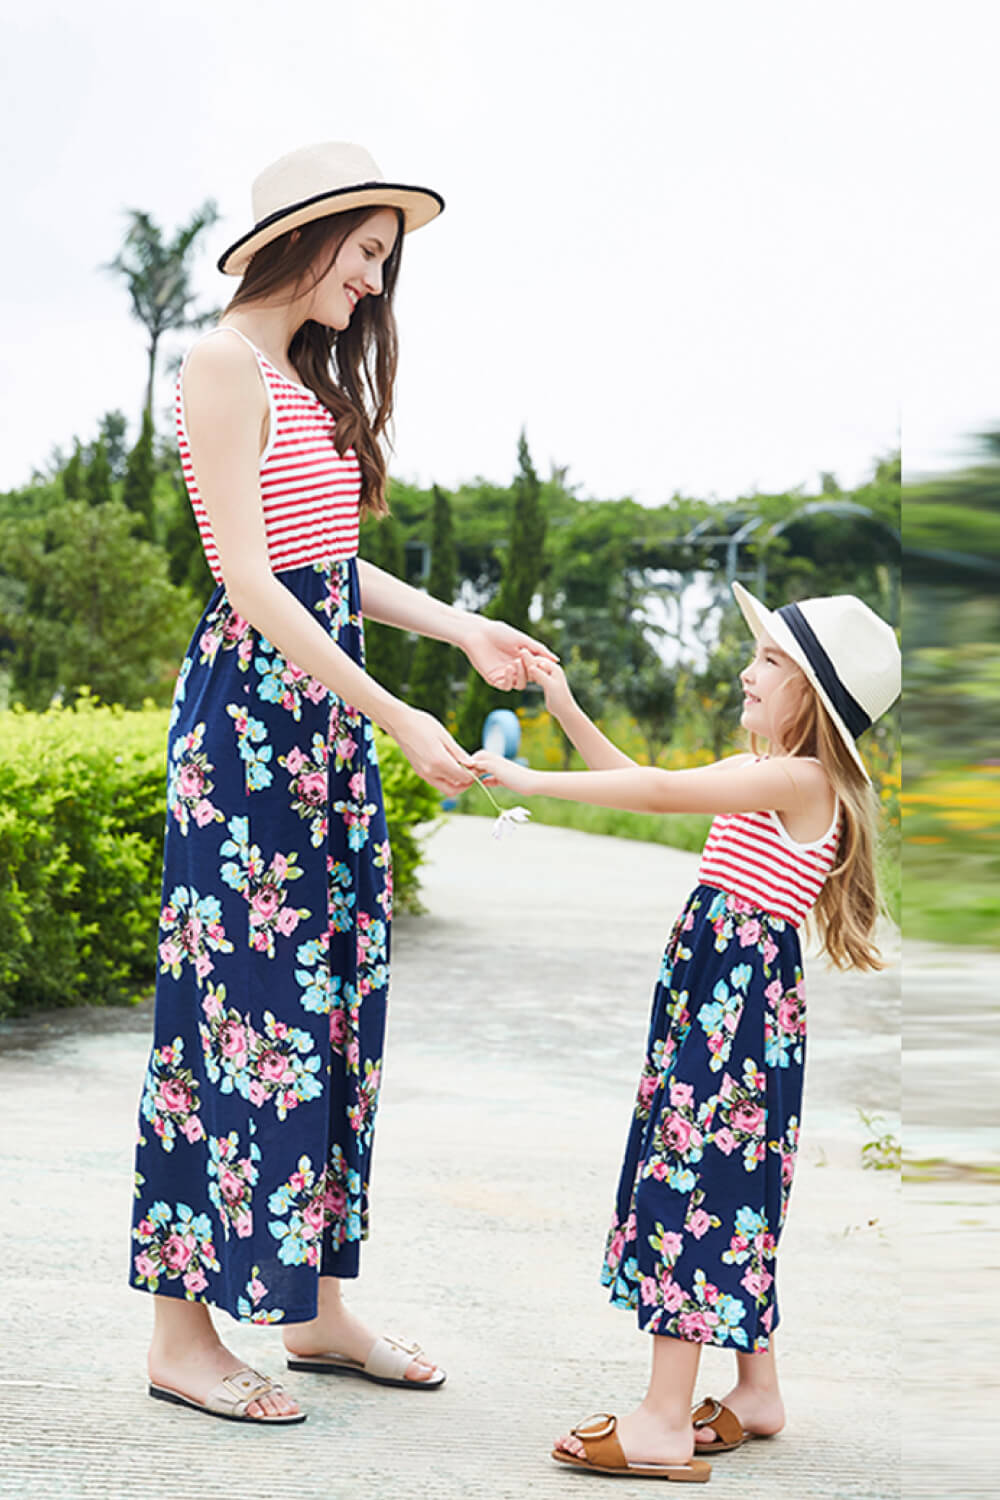 - Women Striped Floral Sleeveless Dress - Mommy & Me - womens dress at TFC&H Co.